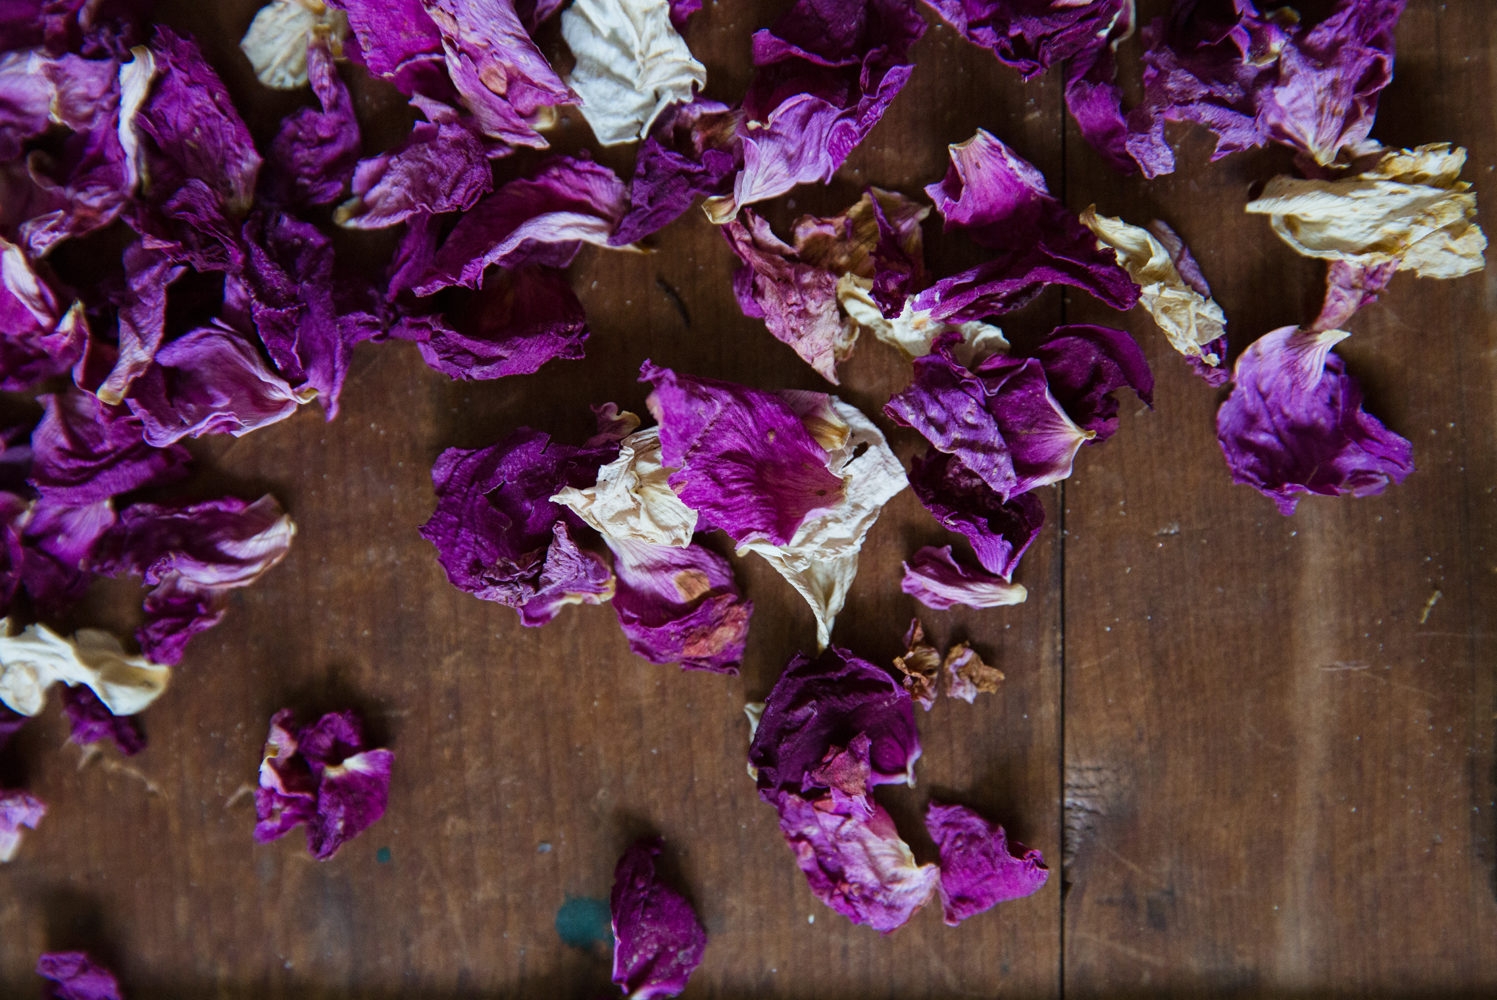 Purple flower petals scattered on a dark wooden table